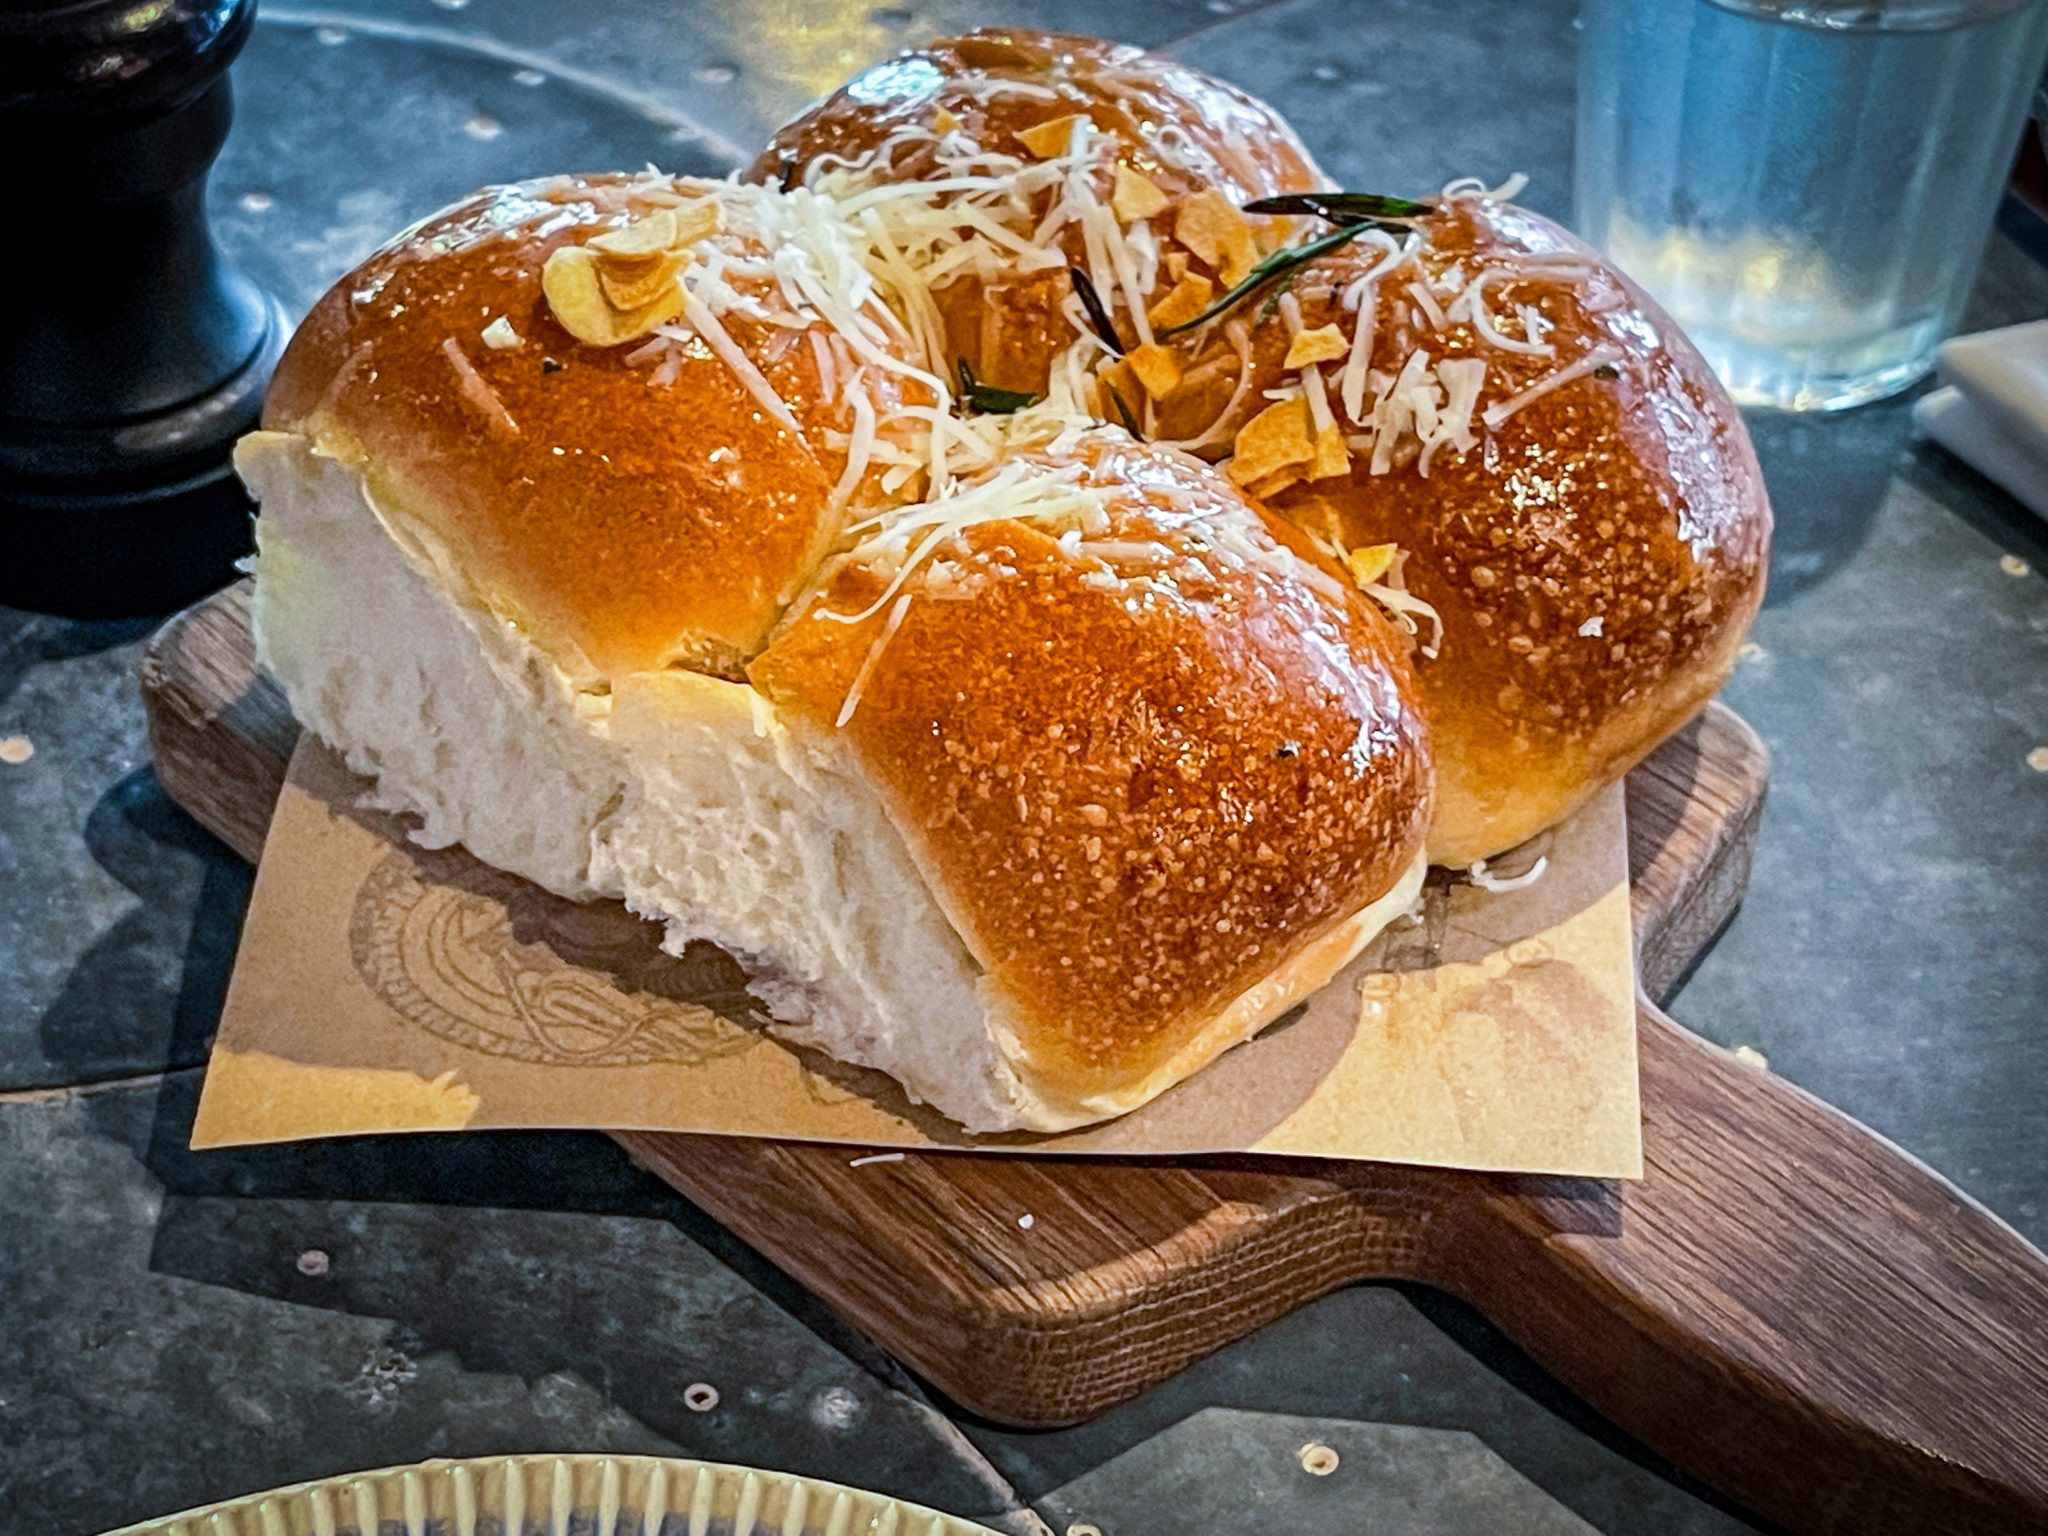 Dinner rolls at a restaurant on a wooden board